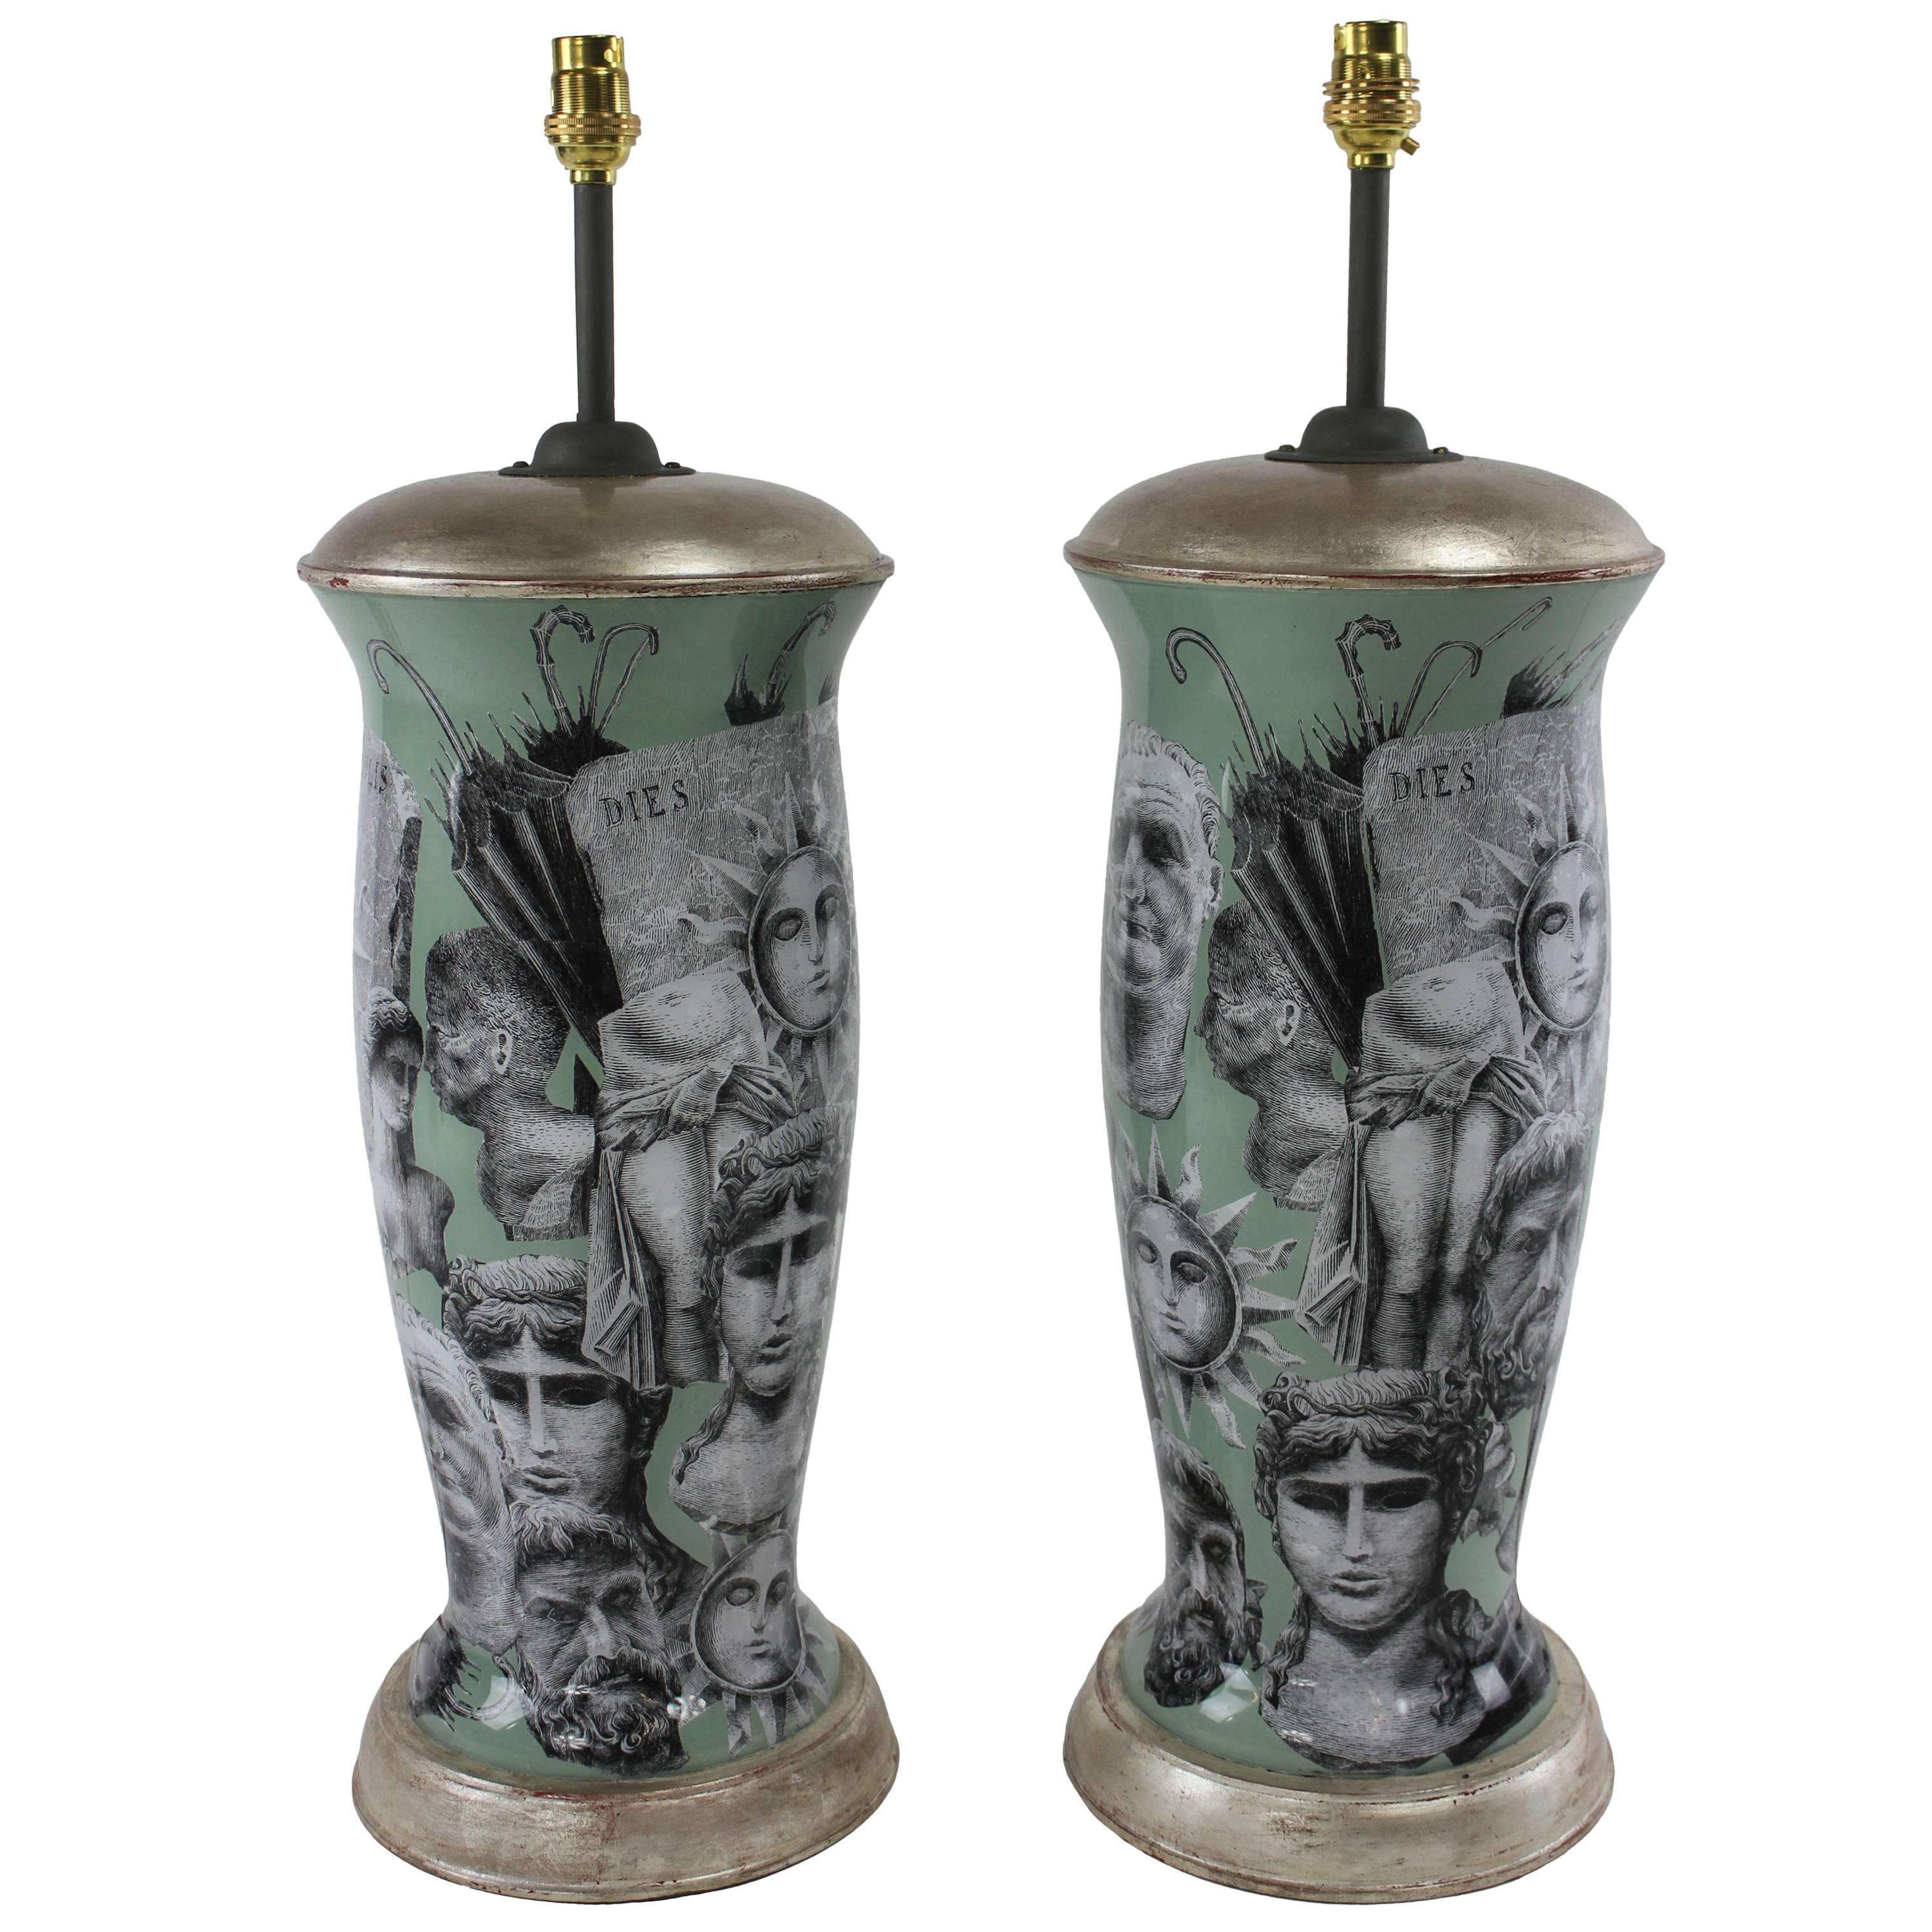 Pair of Fornasetti Inspired Lamps